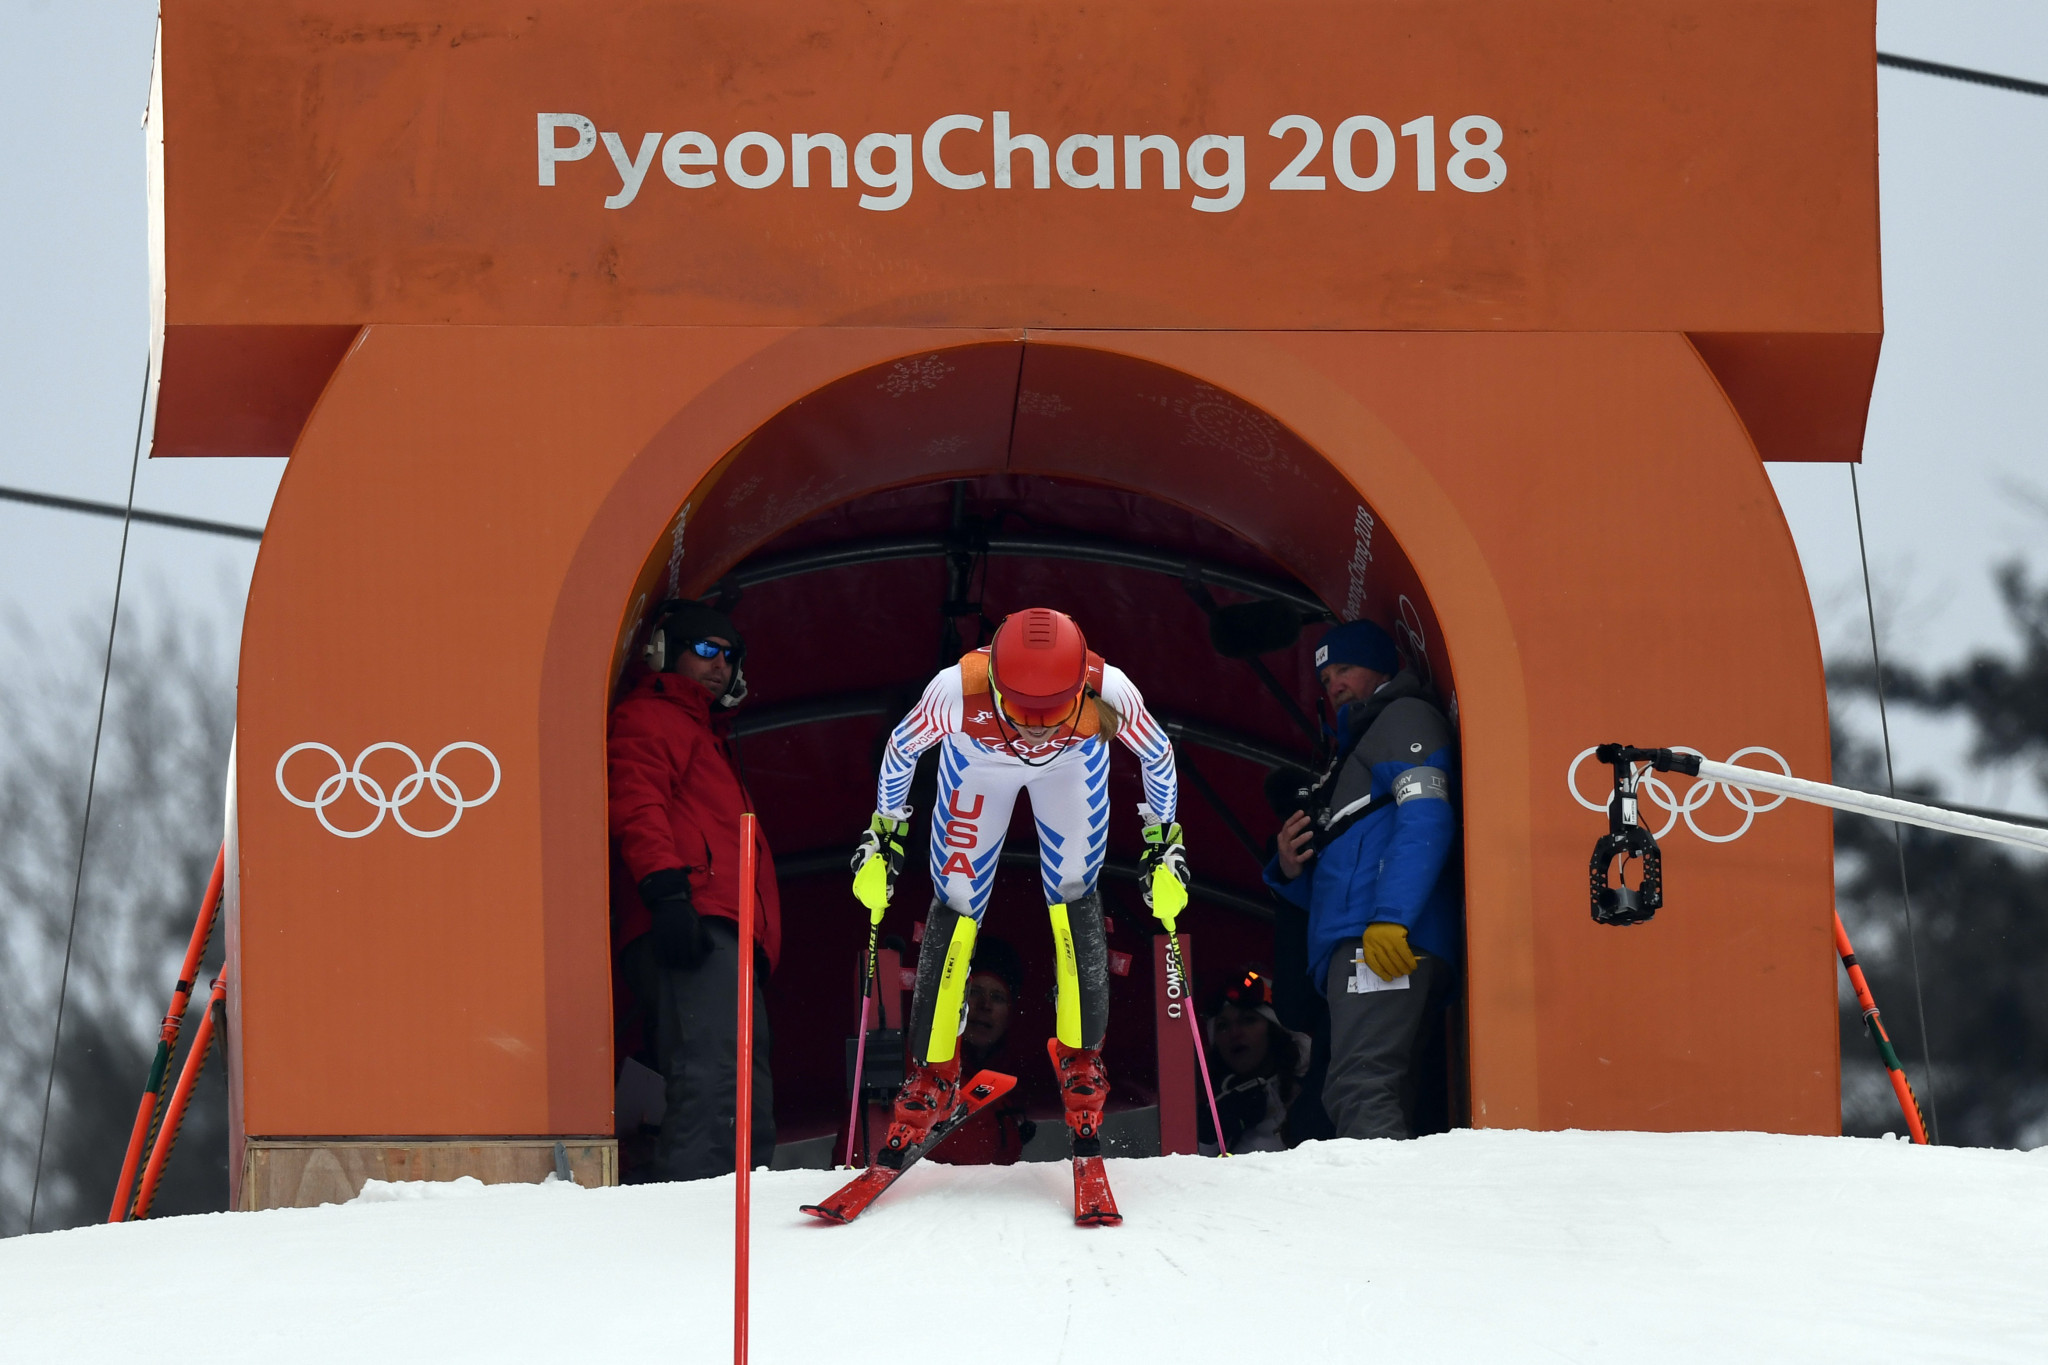 Eo Jae-suk acted as an Alpine skiing commentator at the Pyeongchang 2018 Winter Olympic Games ©Getty Images